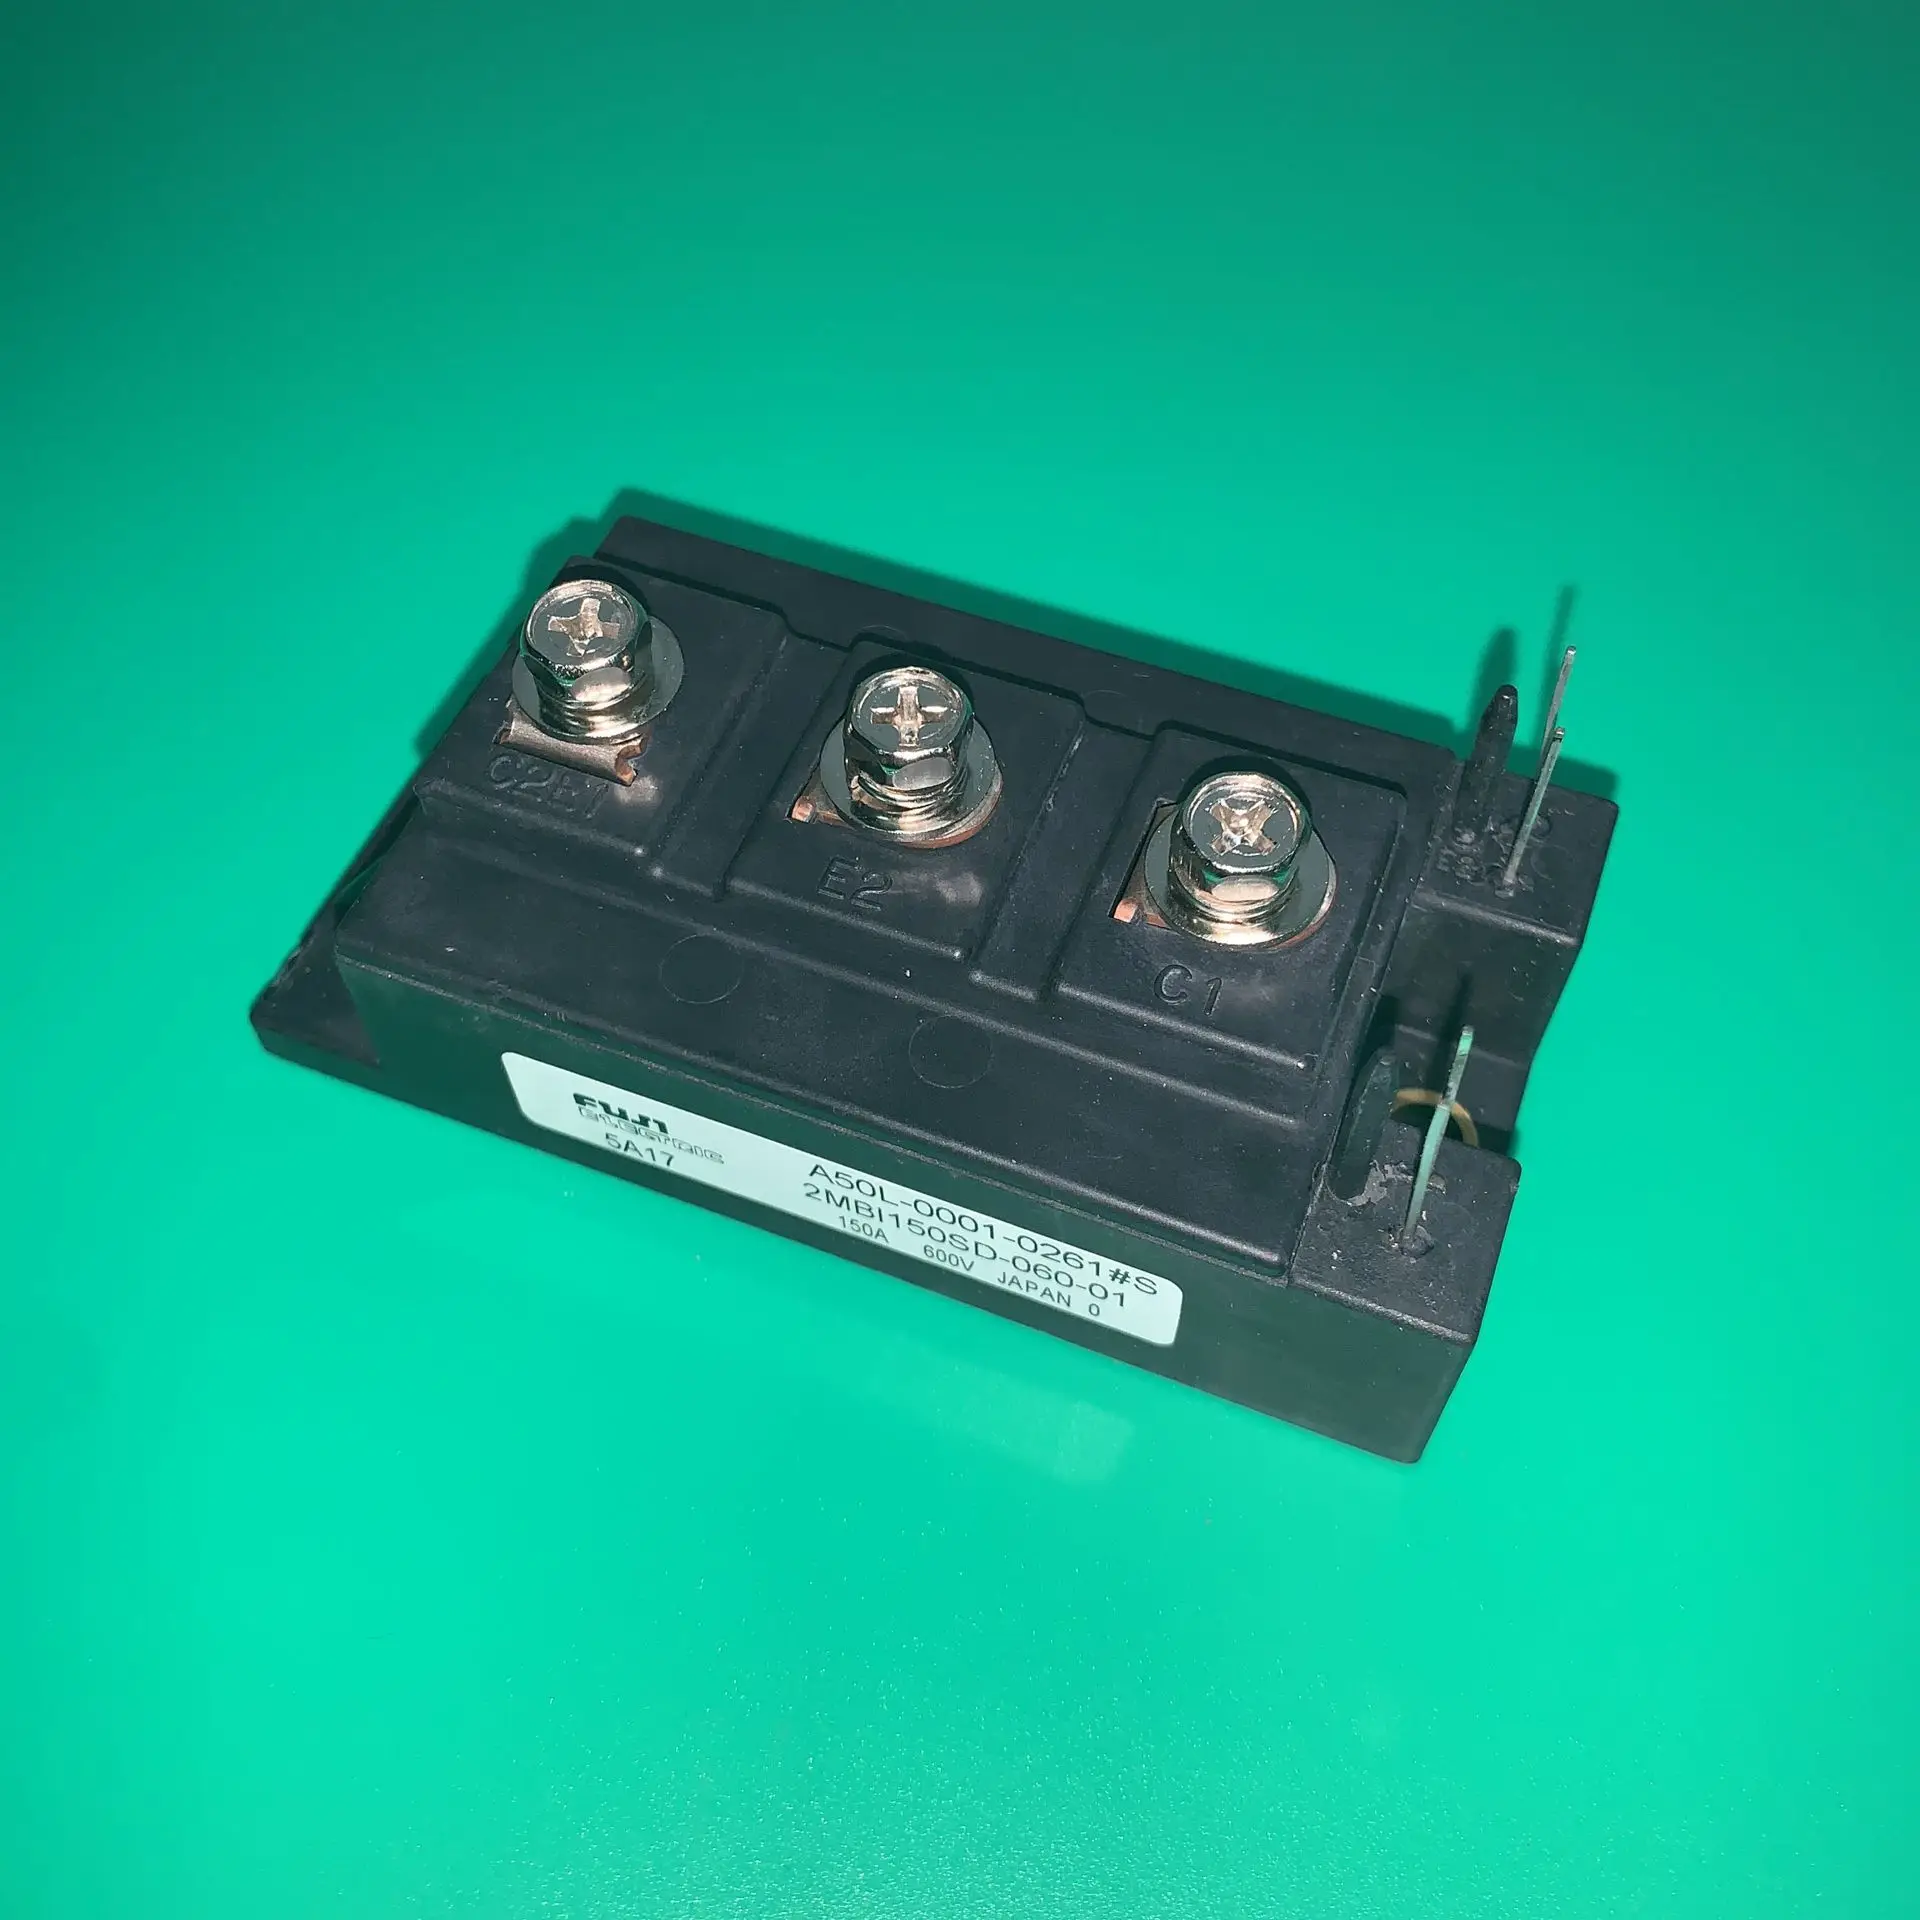 

A50L-0001-0261#S MODULE 150A 600V IGBT 2MBI150SD-060-01 2MBI150SD06001 A50L00010261S 2MBI150 SD-060-01 2MB1150SD-060-01 A50L0001